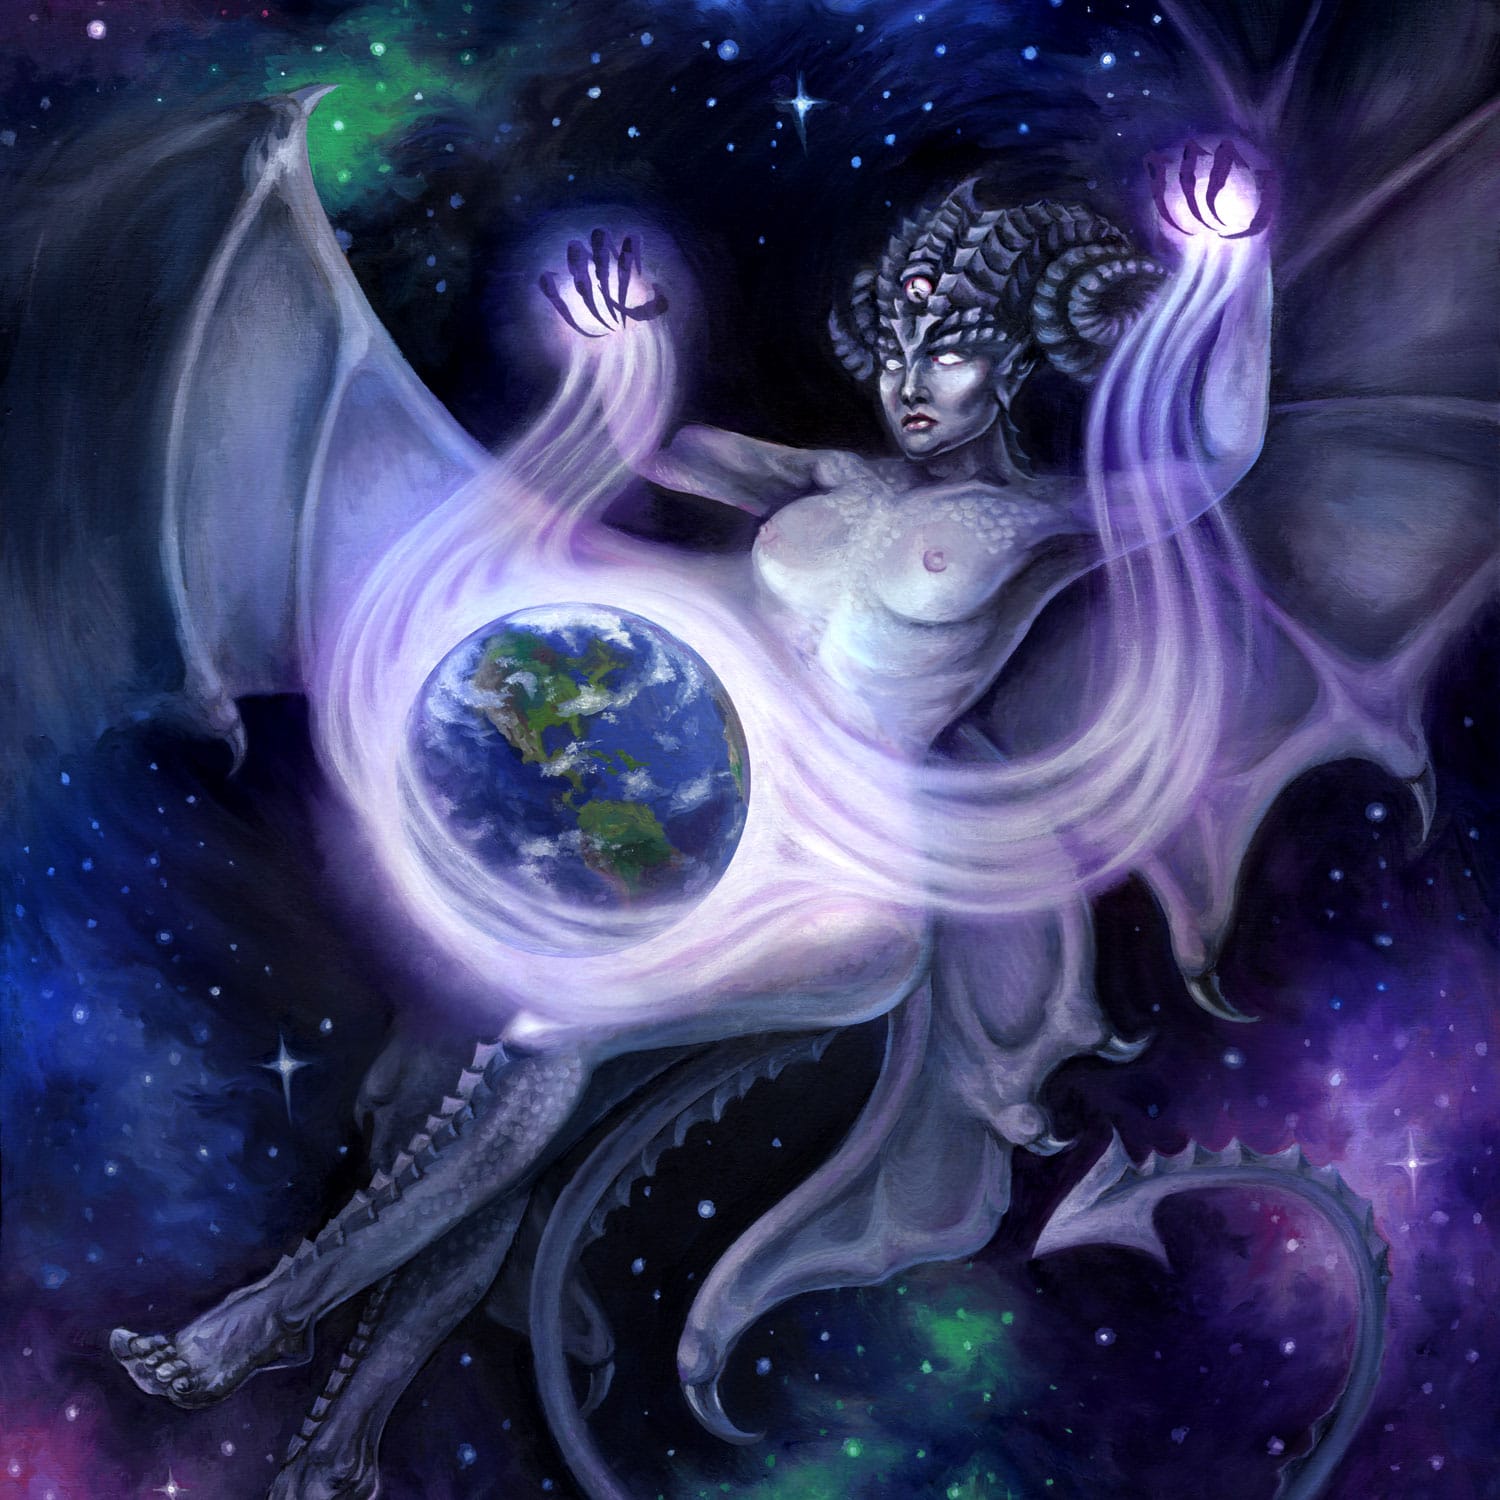 Otherworldly - Painting of a Succubus Space Faerie Casting a Spell on Earth by Rebecca Magar